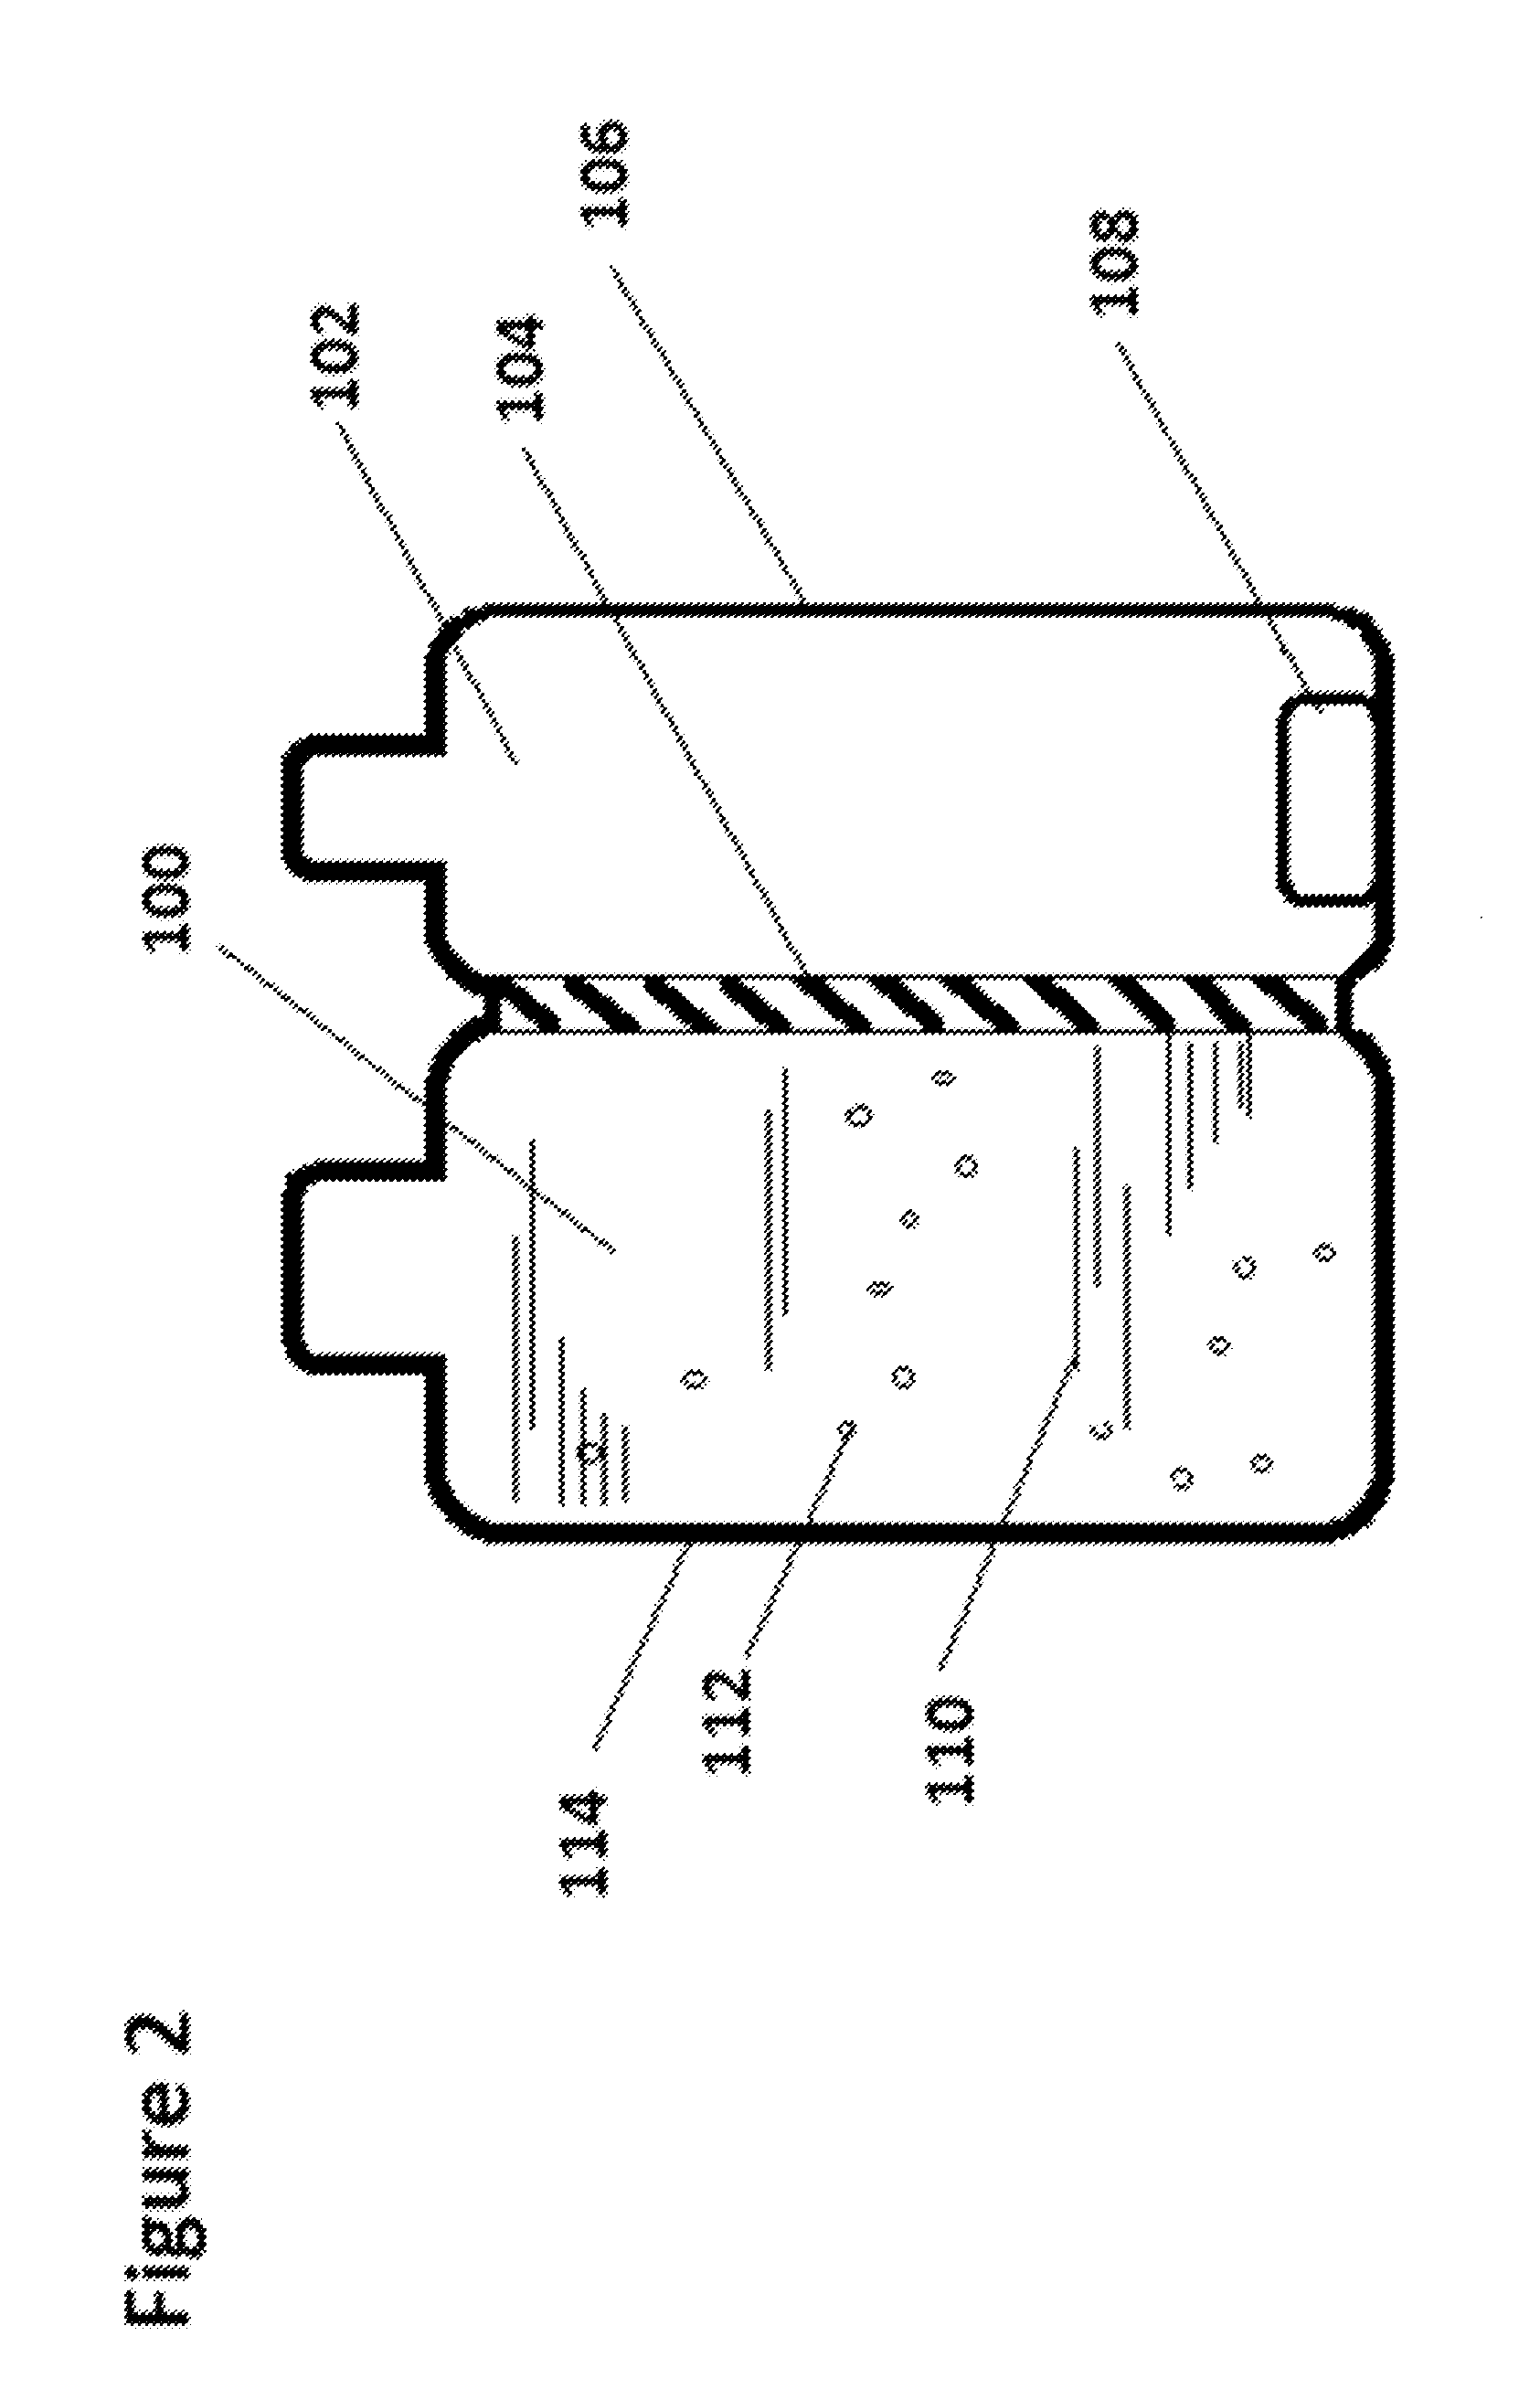 Method and Apparatus to Produce Hydrogen-Rich Materials